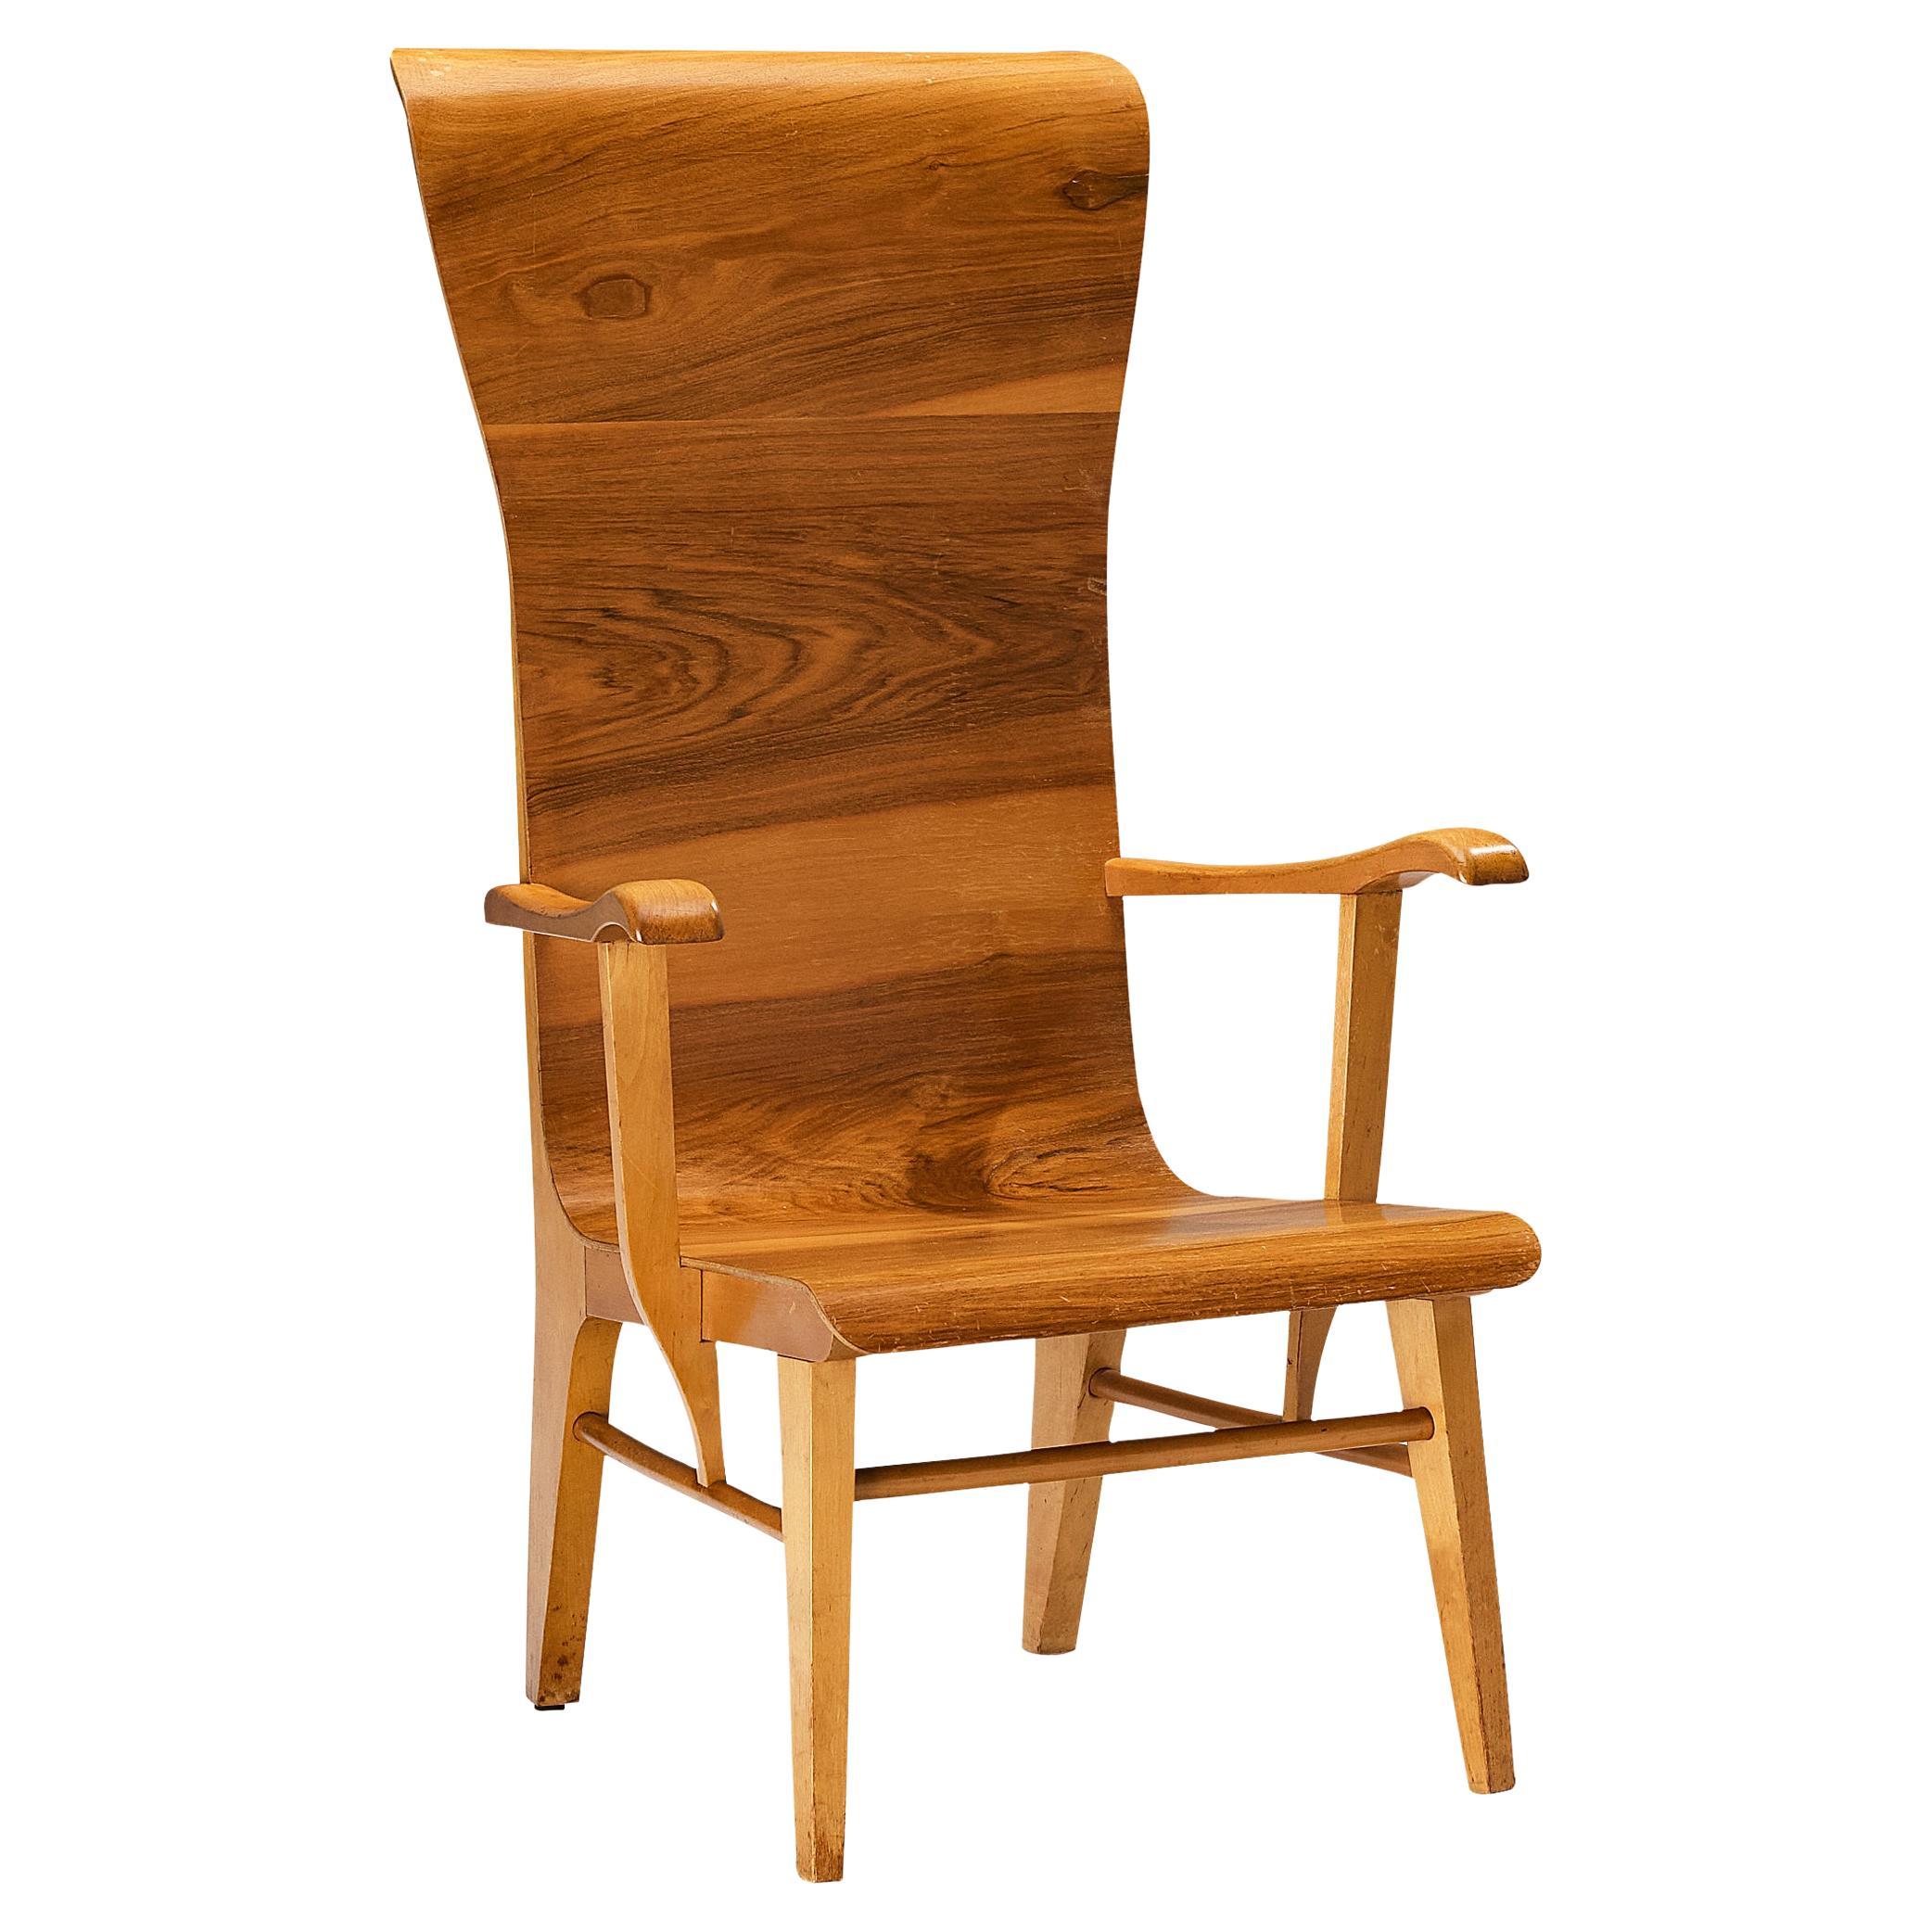 Auke Komter for Metz & Co Rare Armchair in Walnut Plywood For Sale